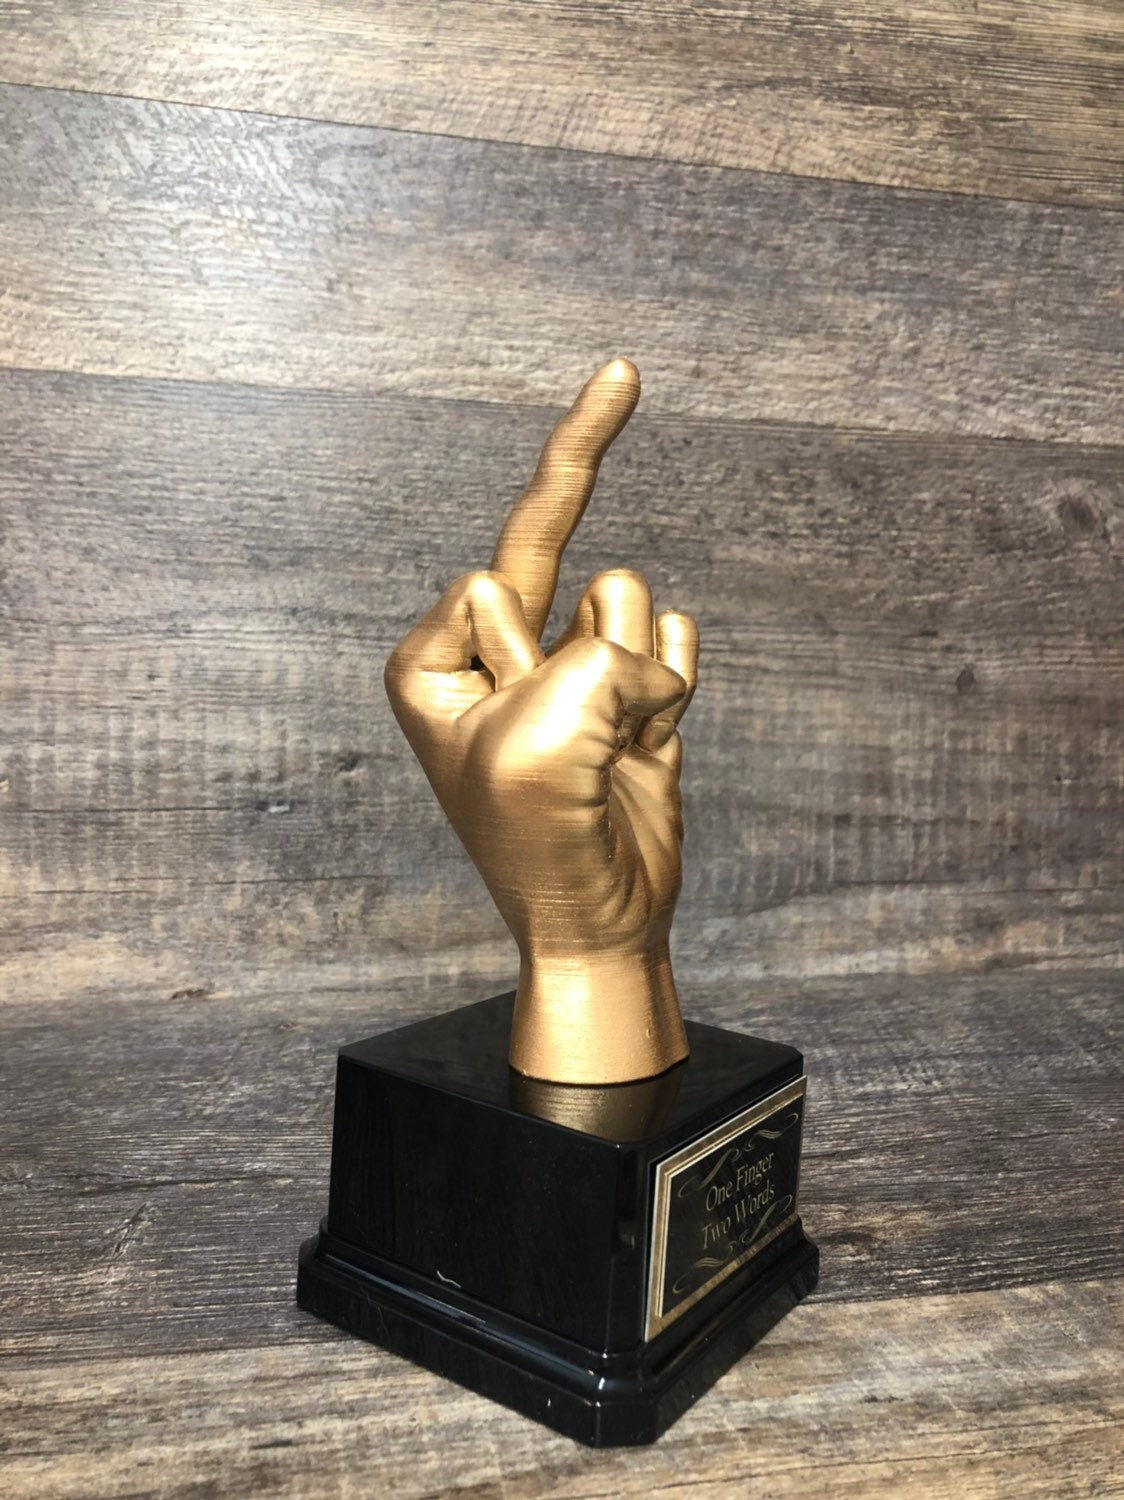 Fishing Trophy Best Fish Story Funny Trophy Middle Finger Fishing Gag Gift Adult Humor Birthday Gift F*ck You Trophy One Finger Two Words